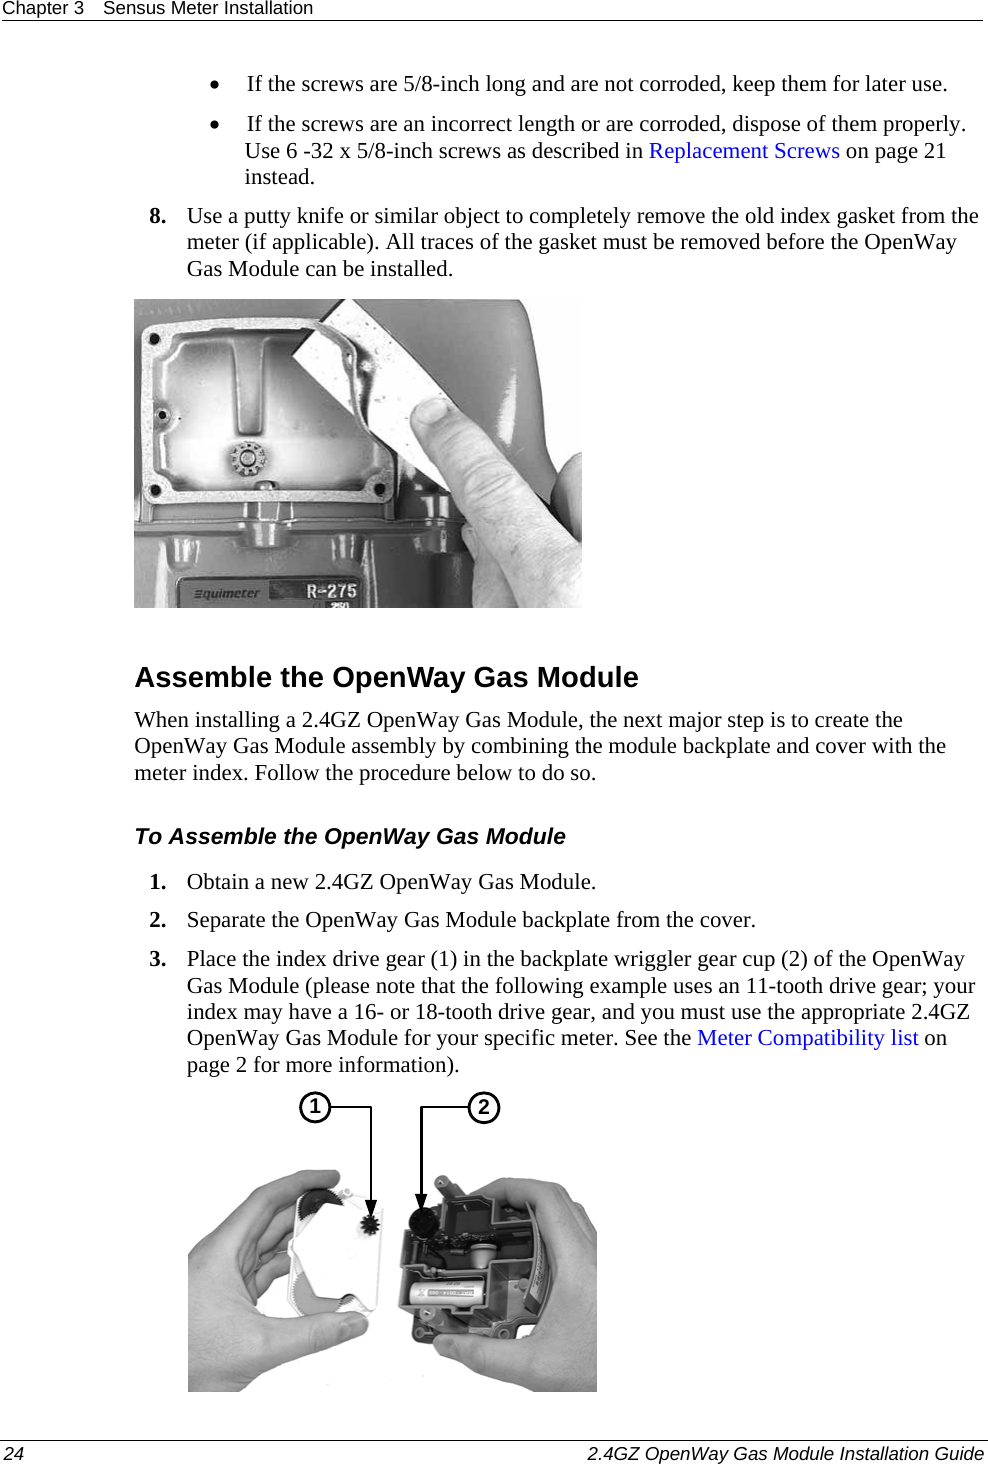 Chapter 3  Sensus Meter Installation  24    2.4GZ OpenWay Gas Module Installation Guide  • If the screws are 5/8-inch long and are not corroded, keep them for later use.  • If the screws are an incorrect length or are corroded, dispose of them properly. Use 6 -32 x 5/8-inch screws as described in Replacement Screws on page 21 instead.  8. Use a putty knife or similar object to completely remove the old index gasket from the meter (if applicable). All traces of the gasket must be removed before the OpenWay Gas Module can be installed.     Assemble the OpenWay Gas Module When installing a 2.4GZ OpenWay Gas Module, the next major step is to create the OpenWay Gas Module assembly by combining the module backplate and cover with the meter index. Follow the procedure below to do so. To Assemble the OpenWay Gas Module 1. Obtain a new 2.4GZ OpenWay Gas Module.  2. Separate the OpenWay Gas Module backplate from the cover.  3. Place the index drive gear (1) in the backplate wriggler gear cup (2) of the OpenWay Gas Module (please note that the following example uses an 11-tooth drive gear; your index may have a 16- or 18-tooth drive gear, and you must use the appropriate 2.4GZ OpenWay Gas Module for your specific meter. See the Meter Compatibility list on page 2 for more information).   21 